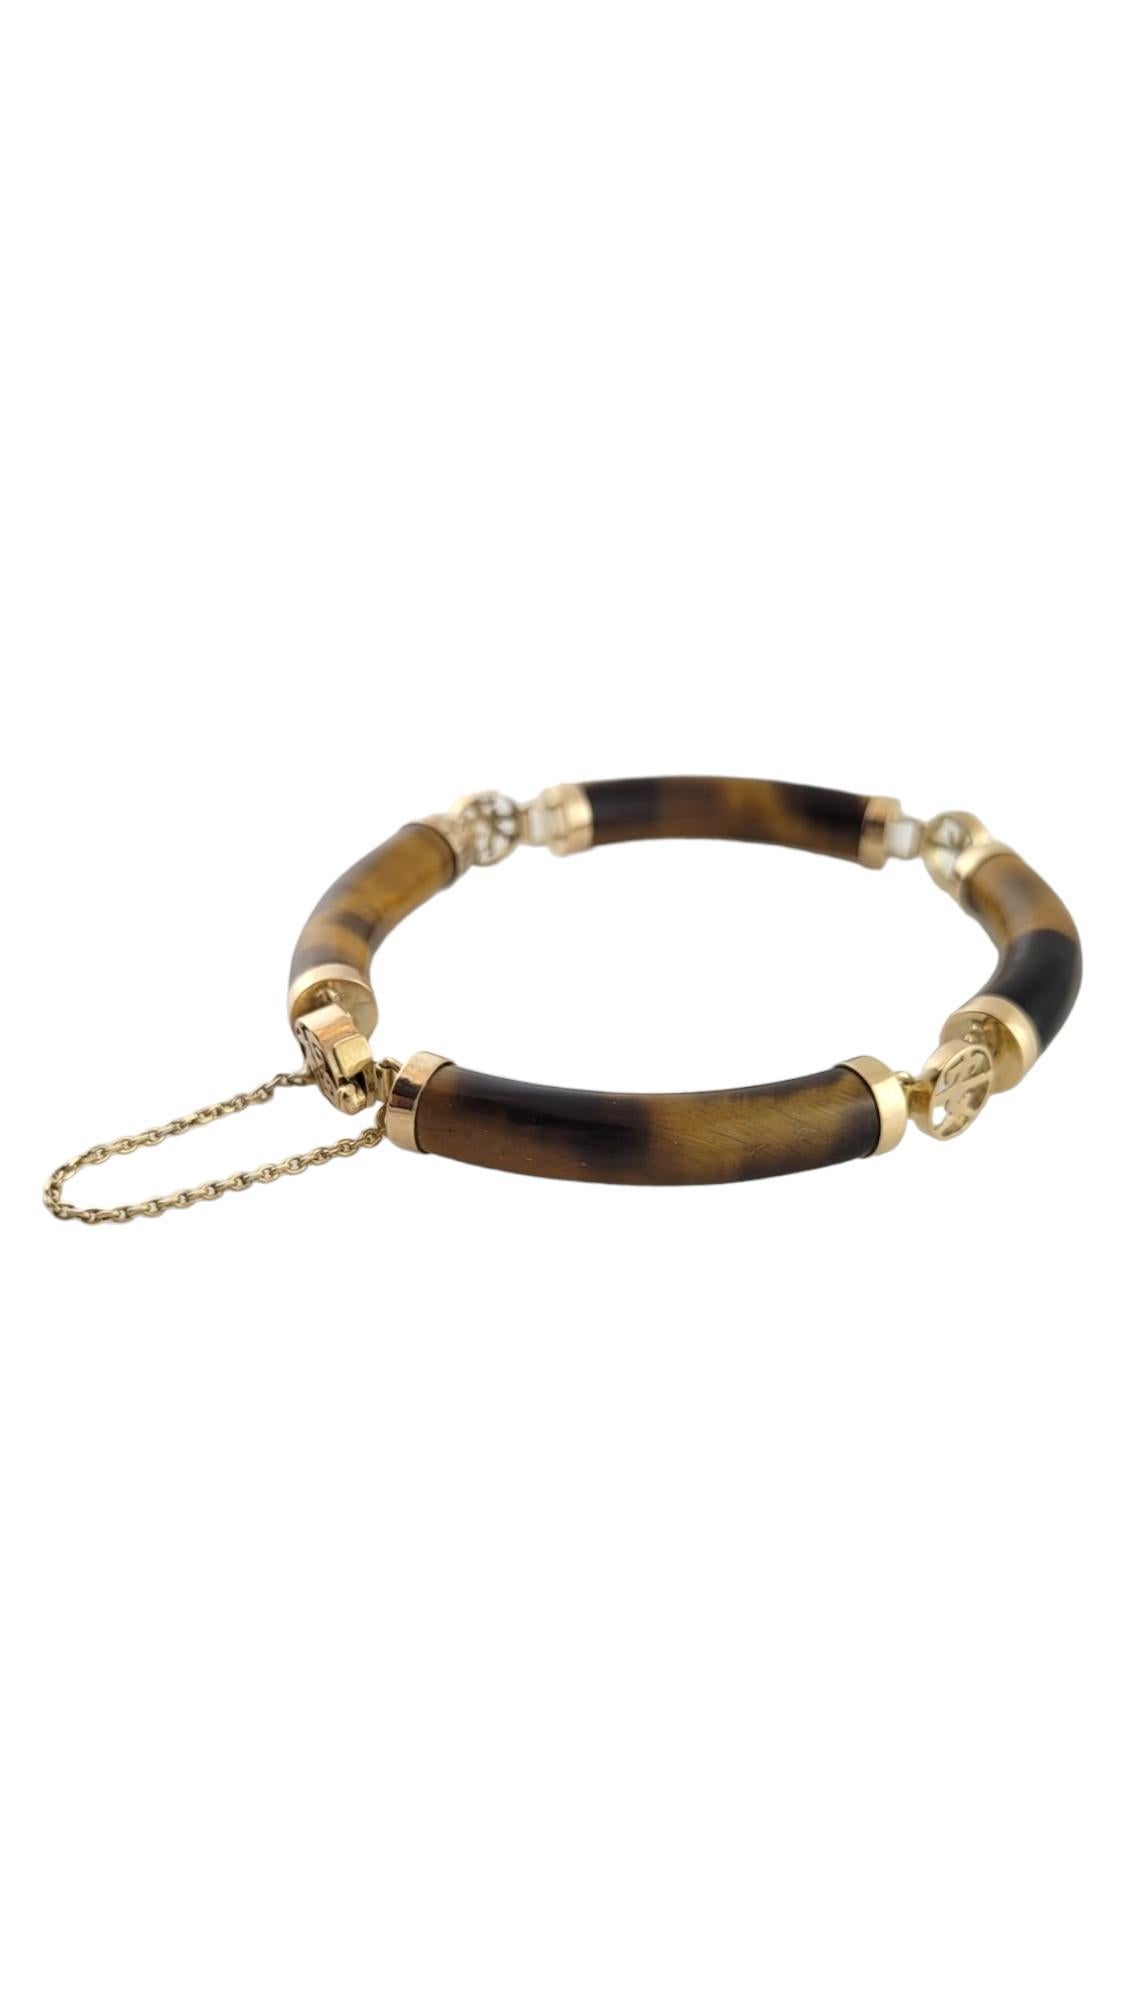 Vintage 14K Yellow Gold Tiger's Eye Bracelet #16173 In Good Condition For Sale In Washington Depot, CT